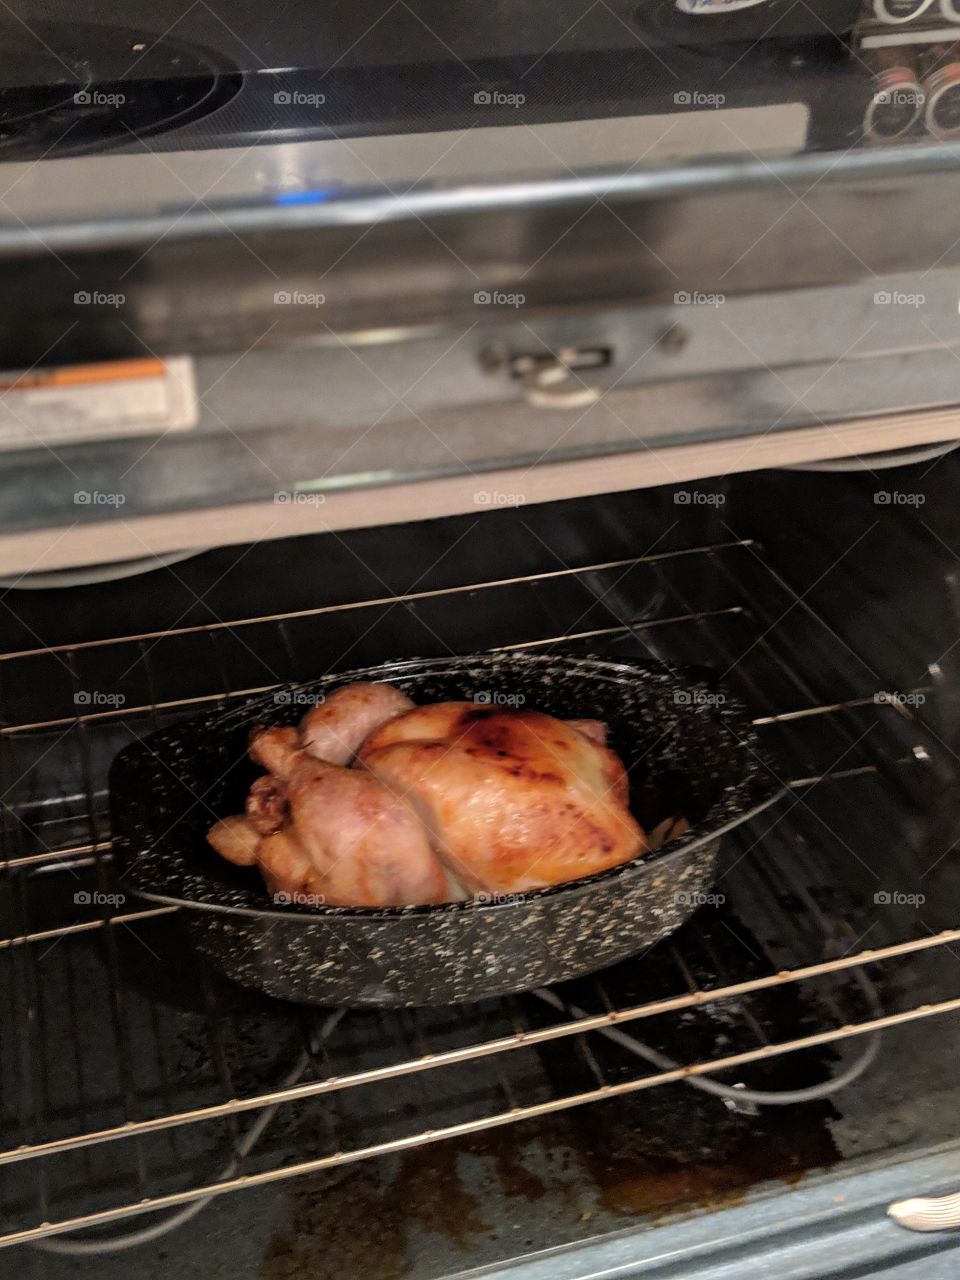 perfectly roasted chicken in oven. simple easy dinner. roasted chicken cooked to perfection.